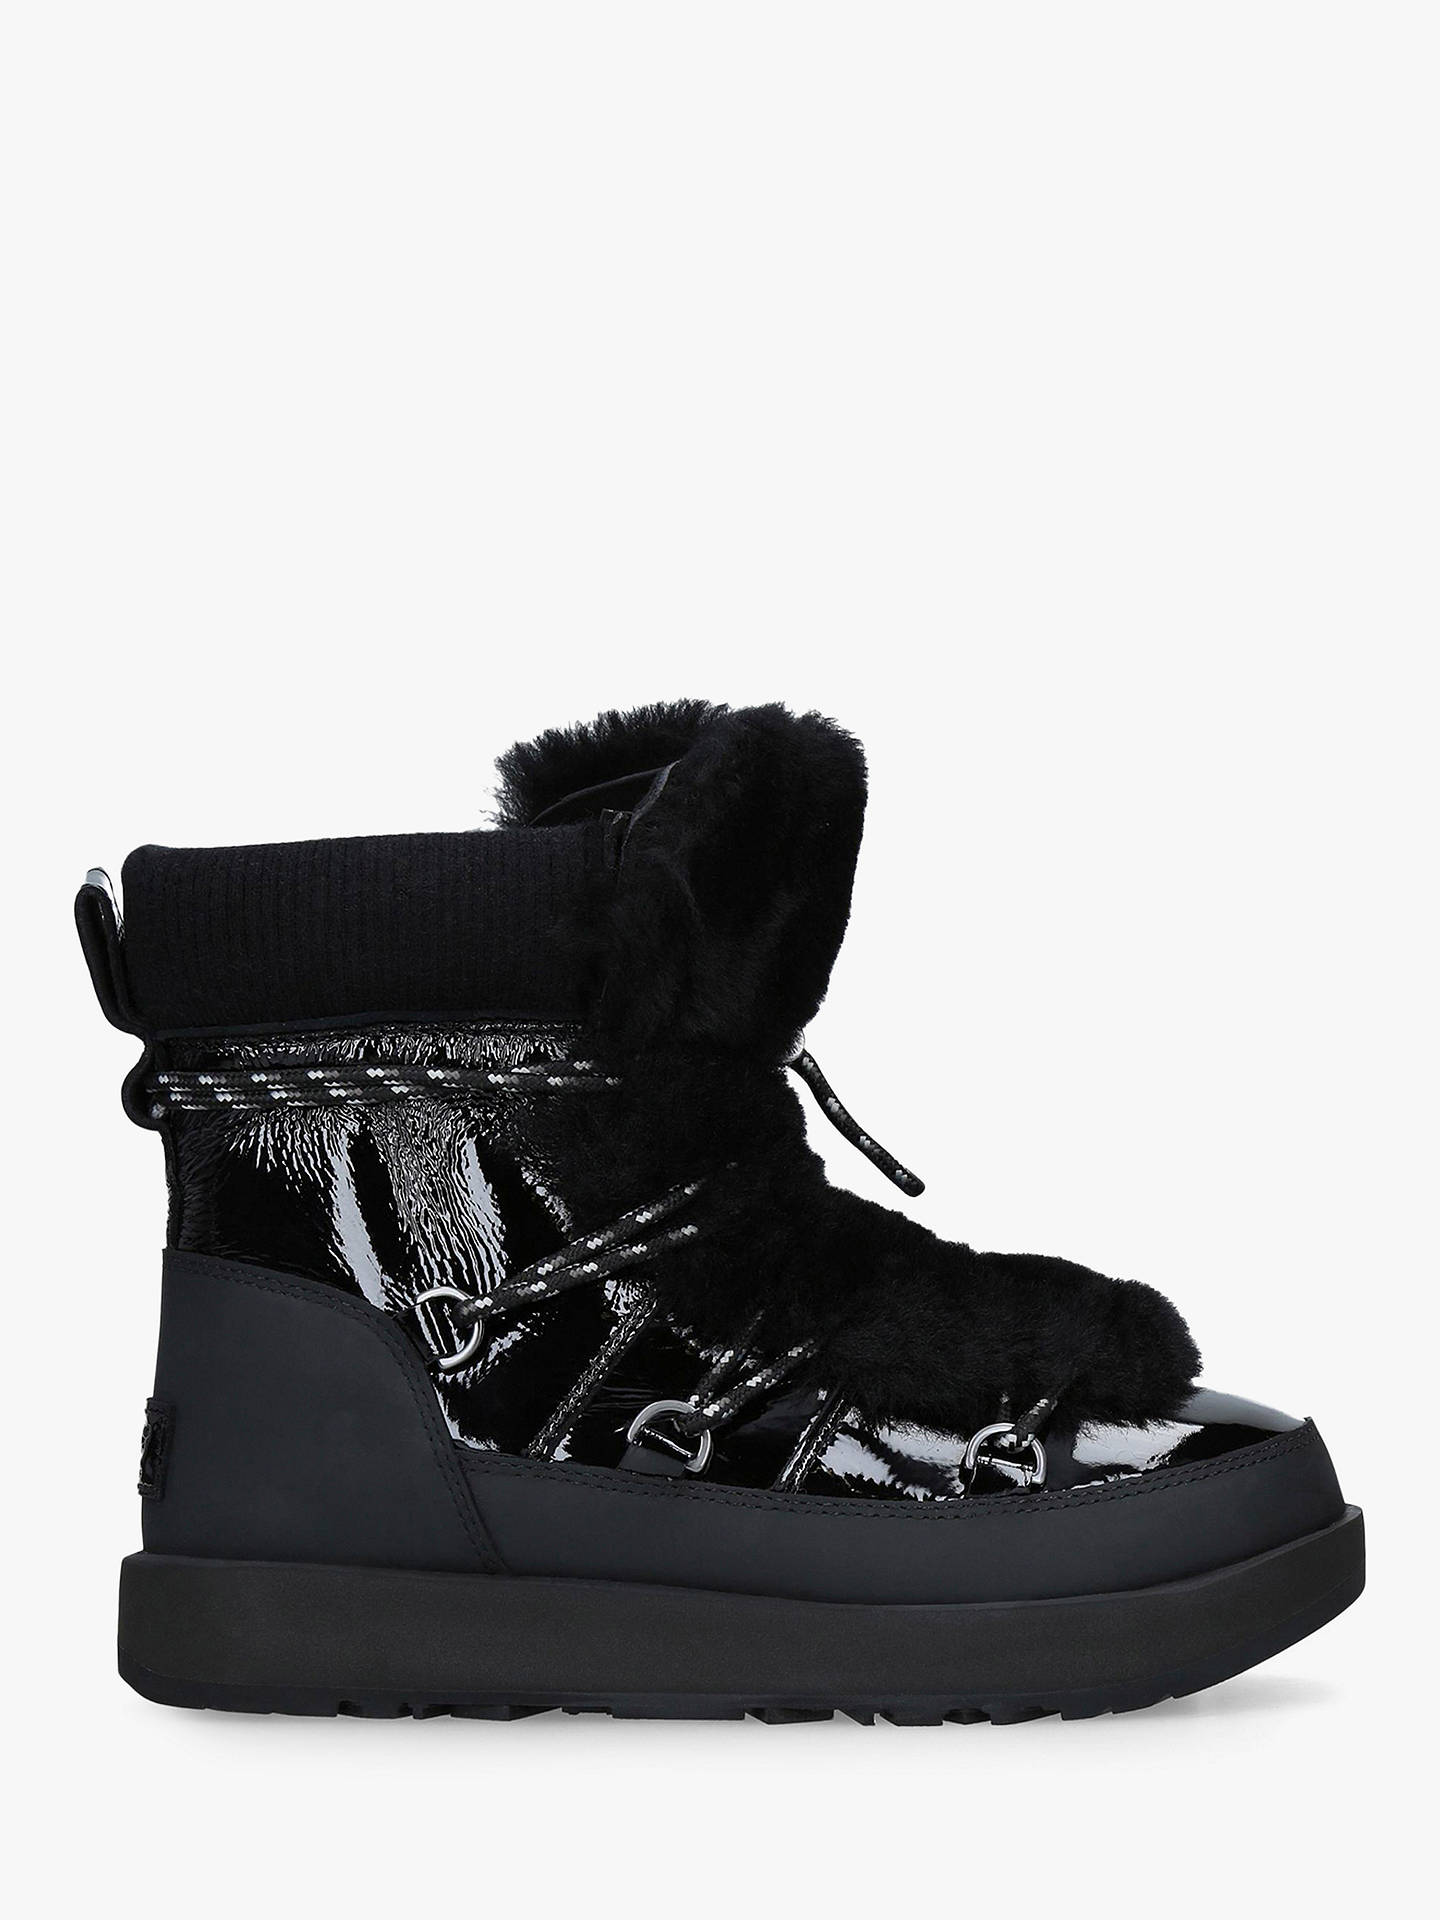 UGG Highland Waterproof Ankle Boots, Black Leather at John Lewis & Partners